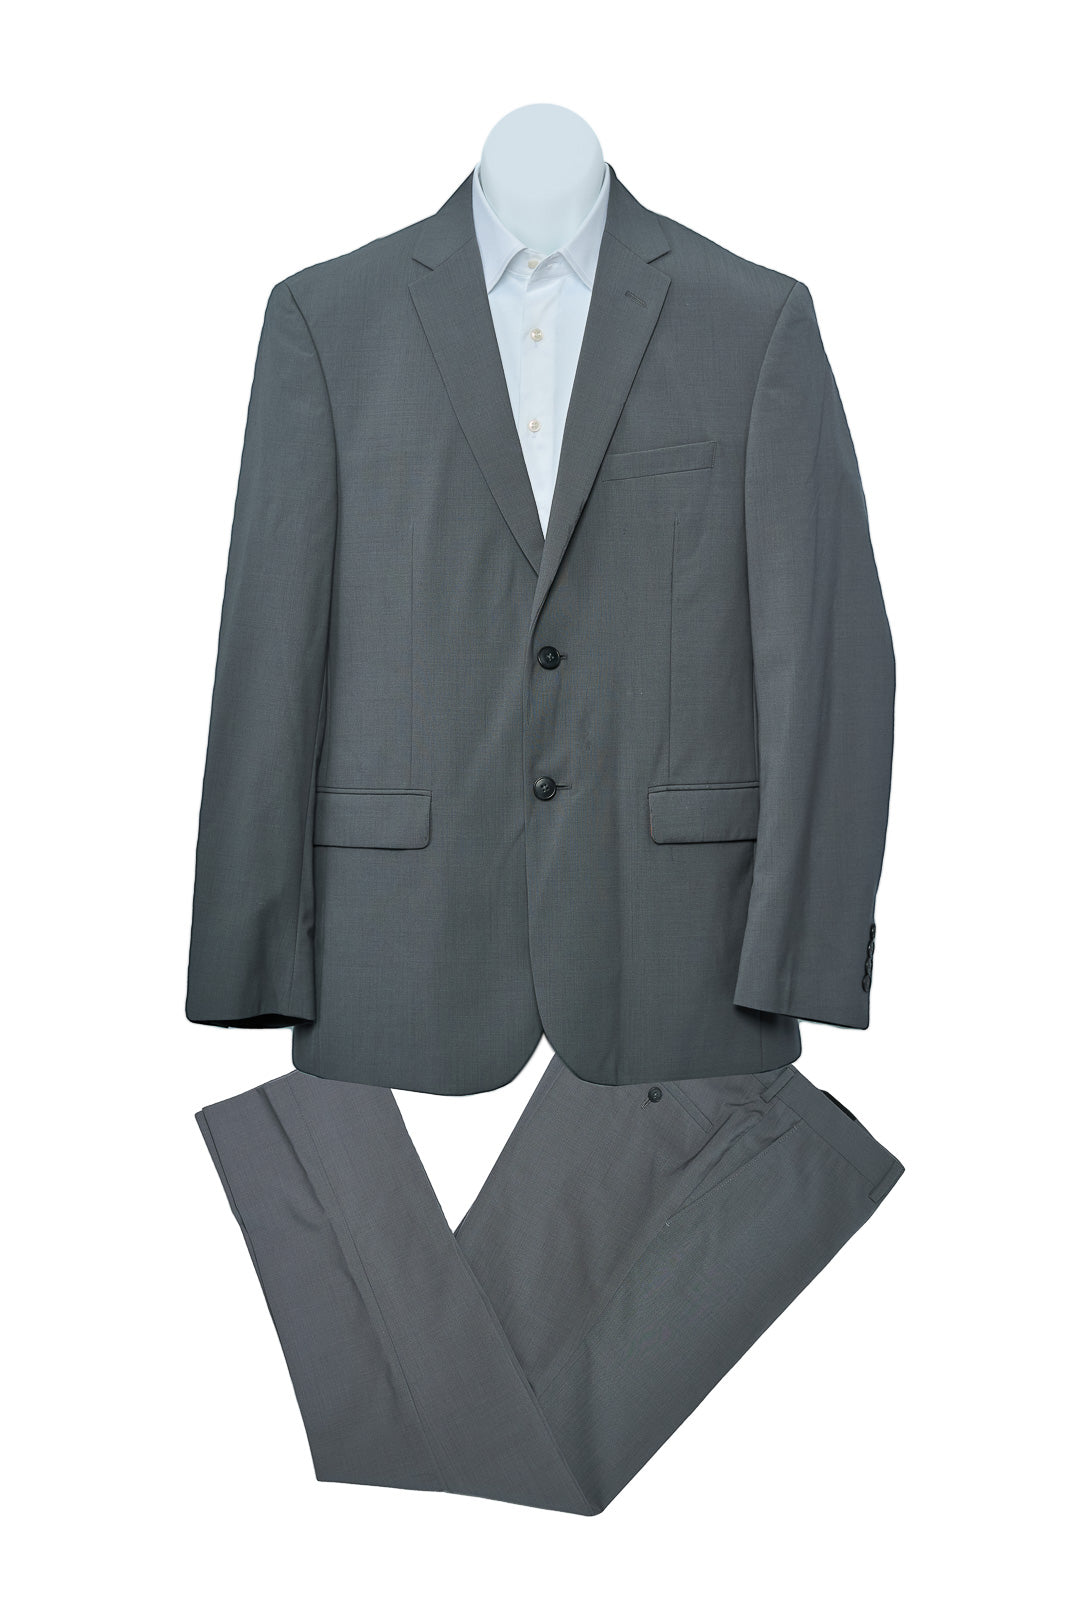 Pure Gray Classic Suit